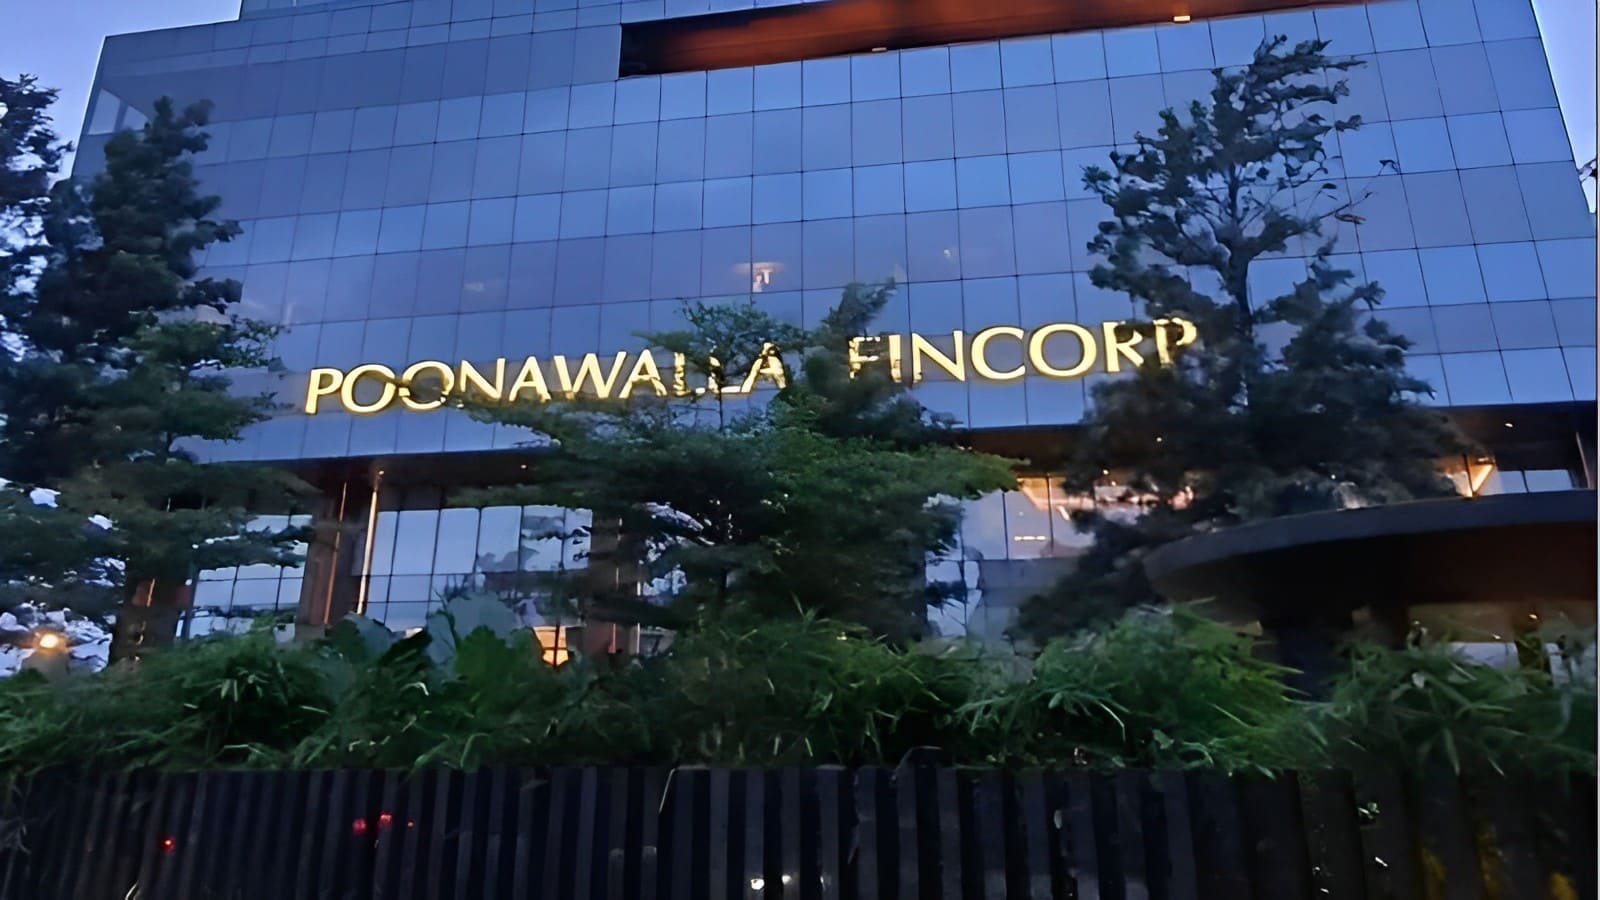 Poonawalla Fincorp Q1FY24 Results: Consolidated PAT of Rs. 225.74 Cr